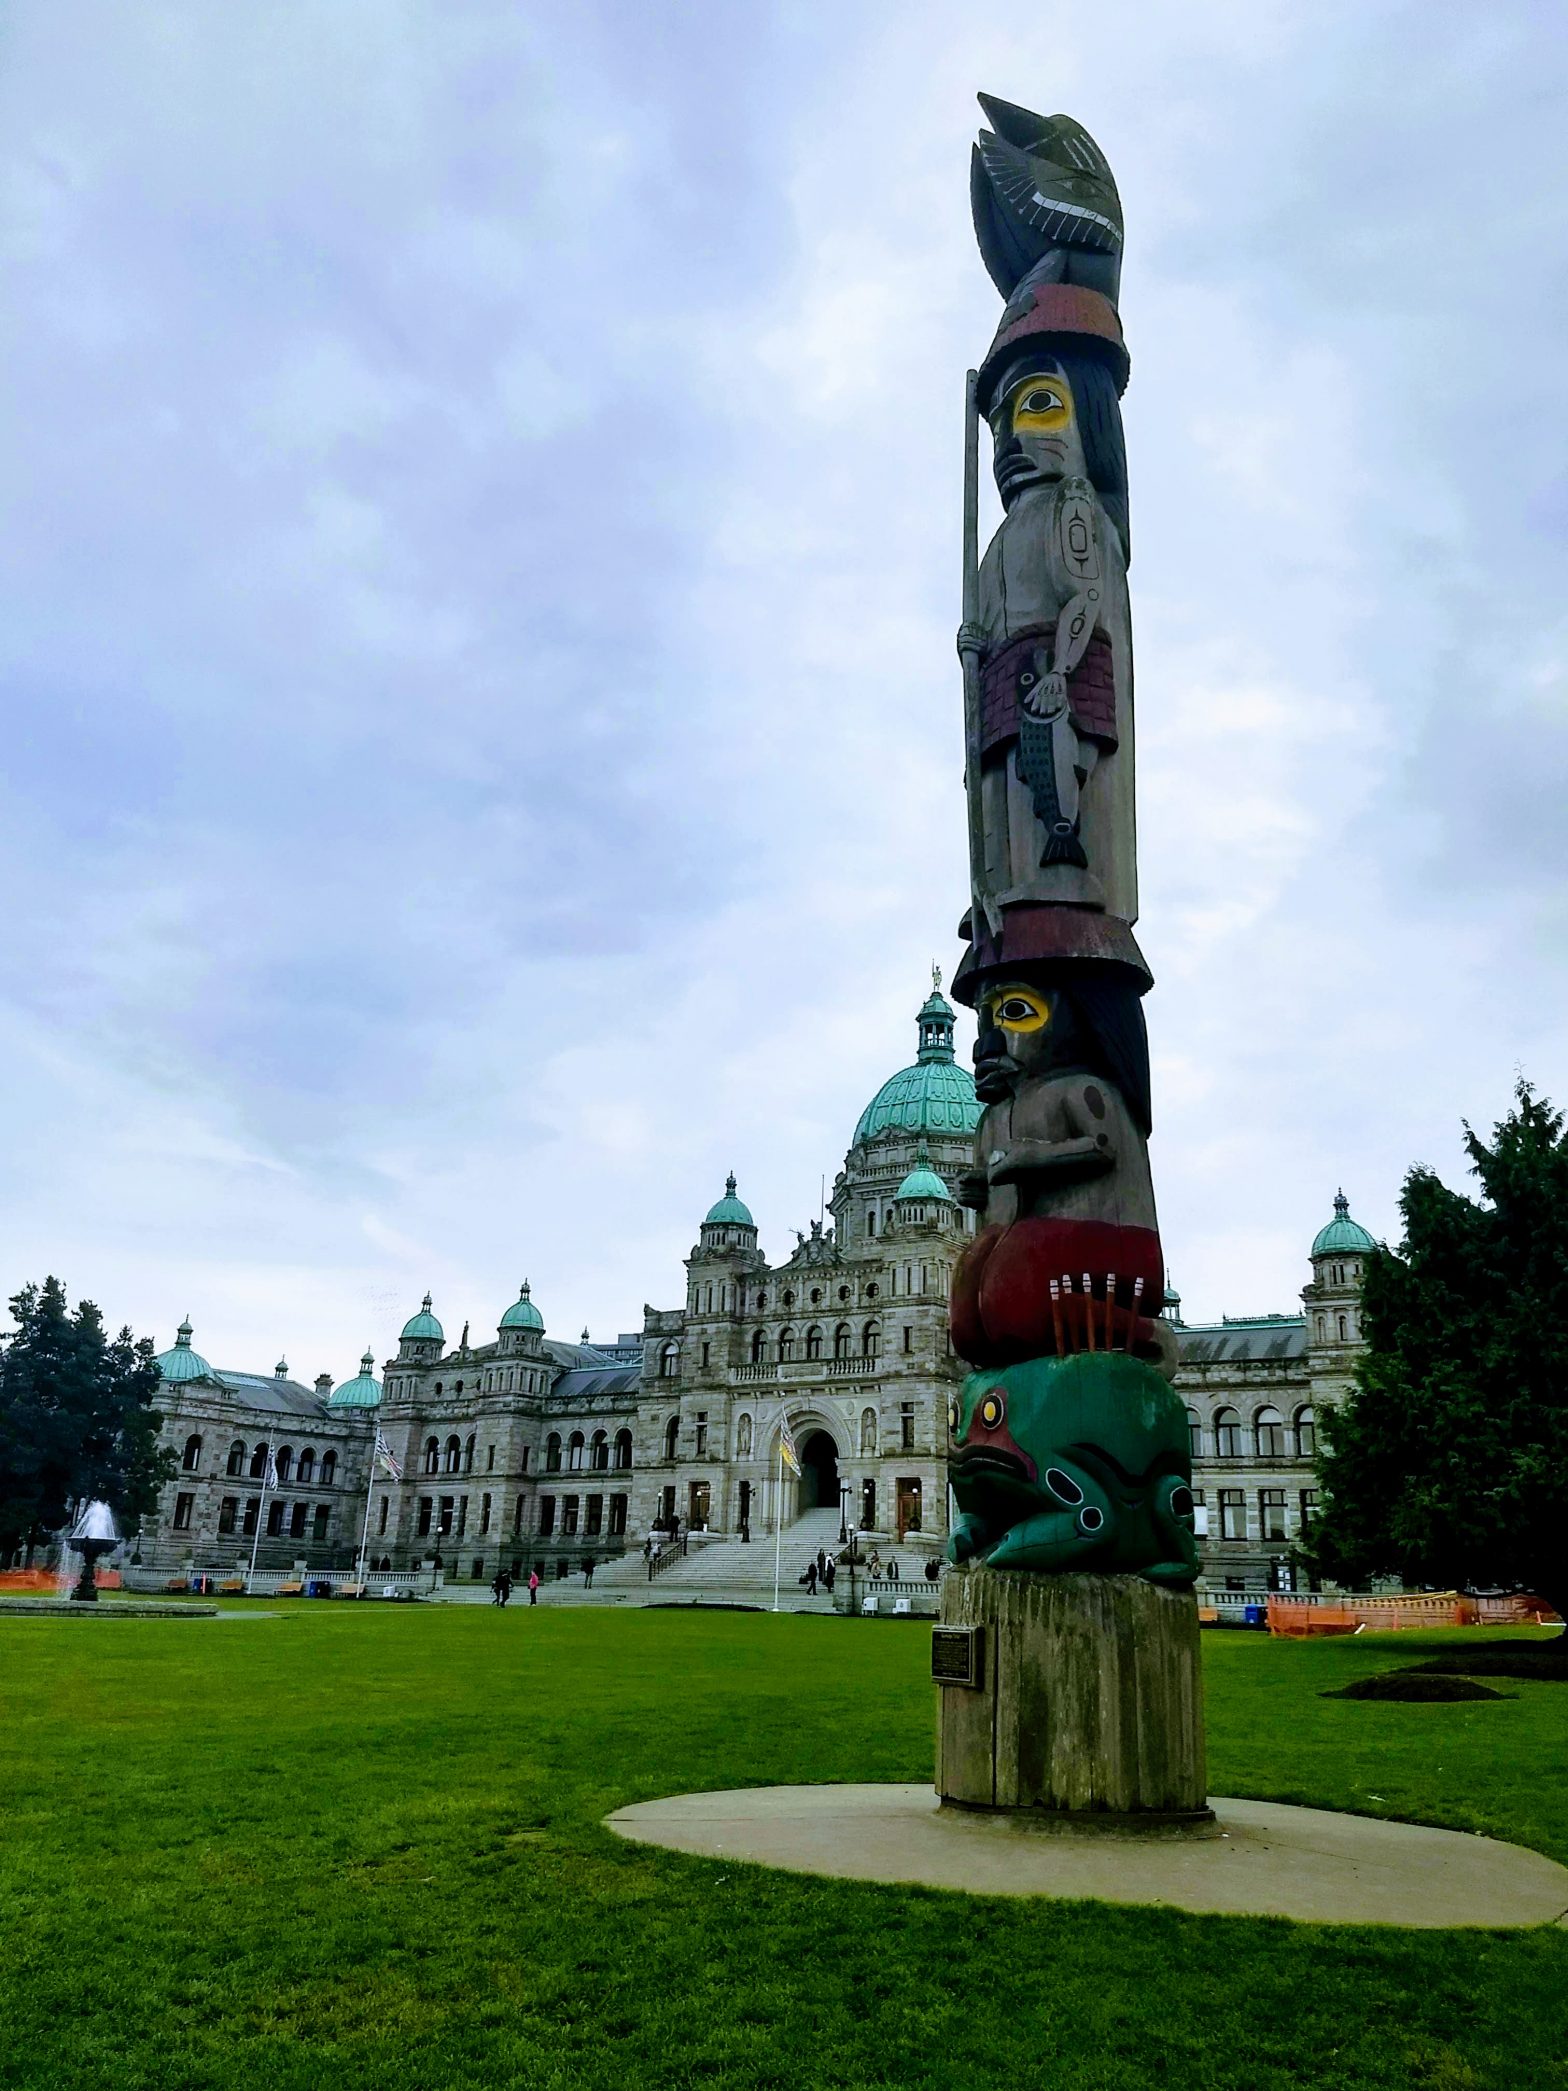 Fascinating facts about the British Columbia Parliament Building in Victoria, Canada. Lost stained glass windows, many nods to the indigenous culture, mouth watering food and incredible architecture! One of the Top Things to Do in Victoria BC. Free tours, learn about Canadian history. Foodie travel, eat affordable food in the luxury Legislative Dining Room. Go explore! #OurCarpeDiem #VictoriaBC #CruiseStop #FreeThingsToDo #architecture